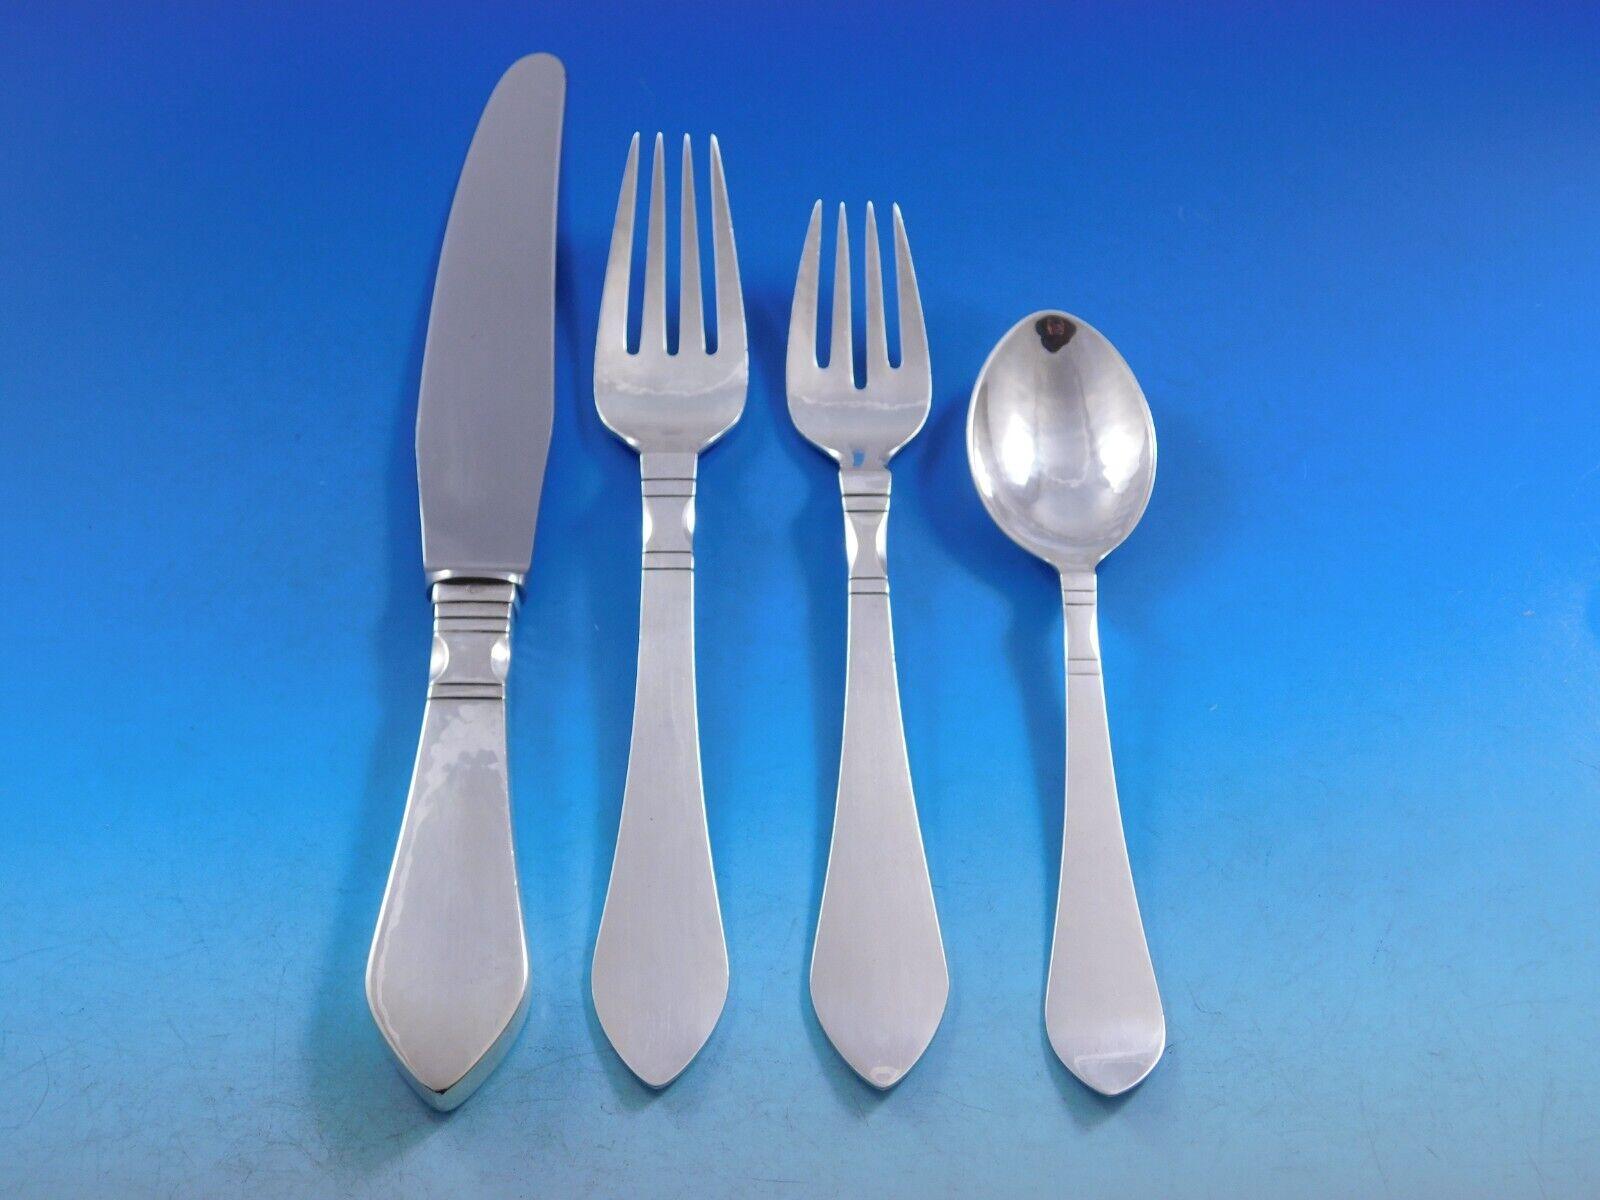 Designed in 1906 by Georg Jensen, the Continental cutlery pattern was the first major cutlery range to emerge from the fledgling silversmithy that was established two years earlier in 1904. In designing Continental, Georg Jensen was inspired by the